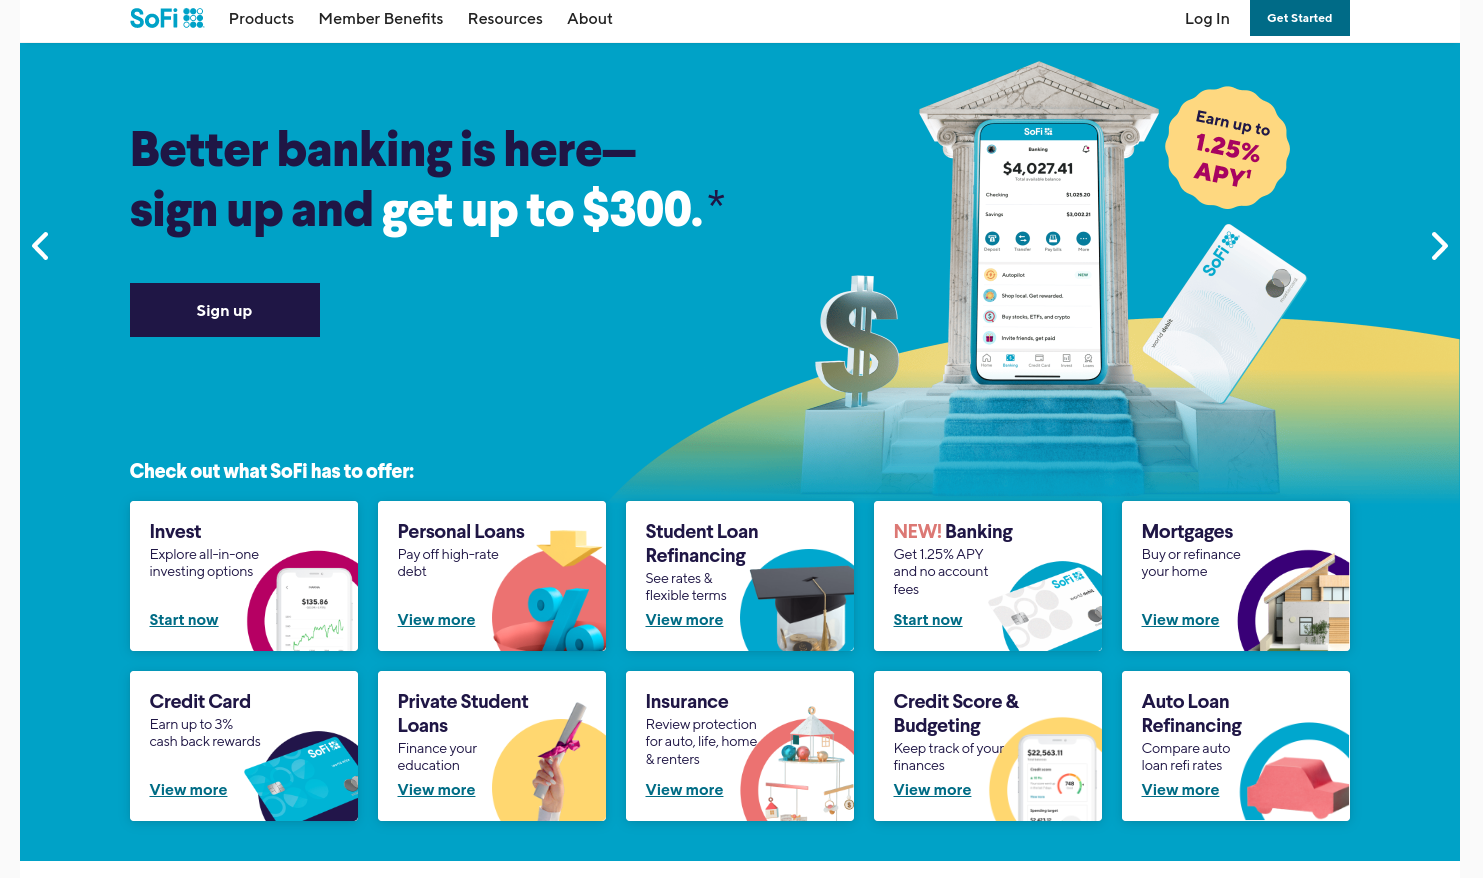 The Sofi bank home page is filled out with various slogans advertising its fintech services